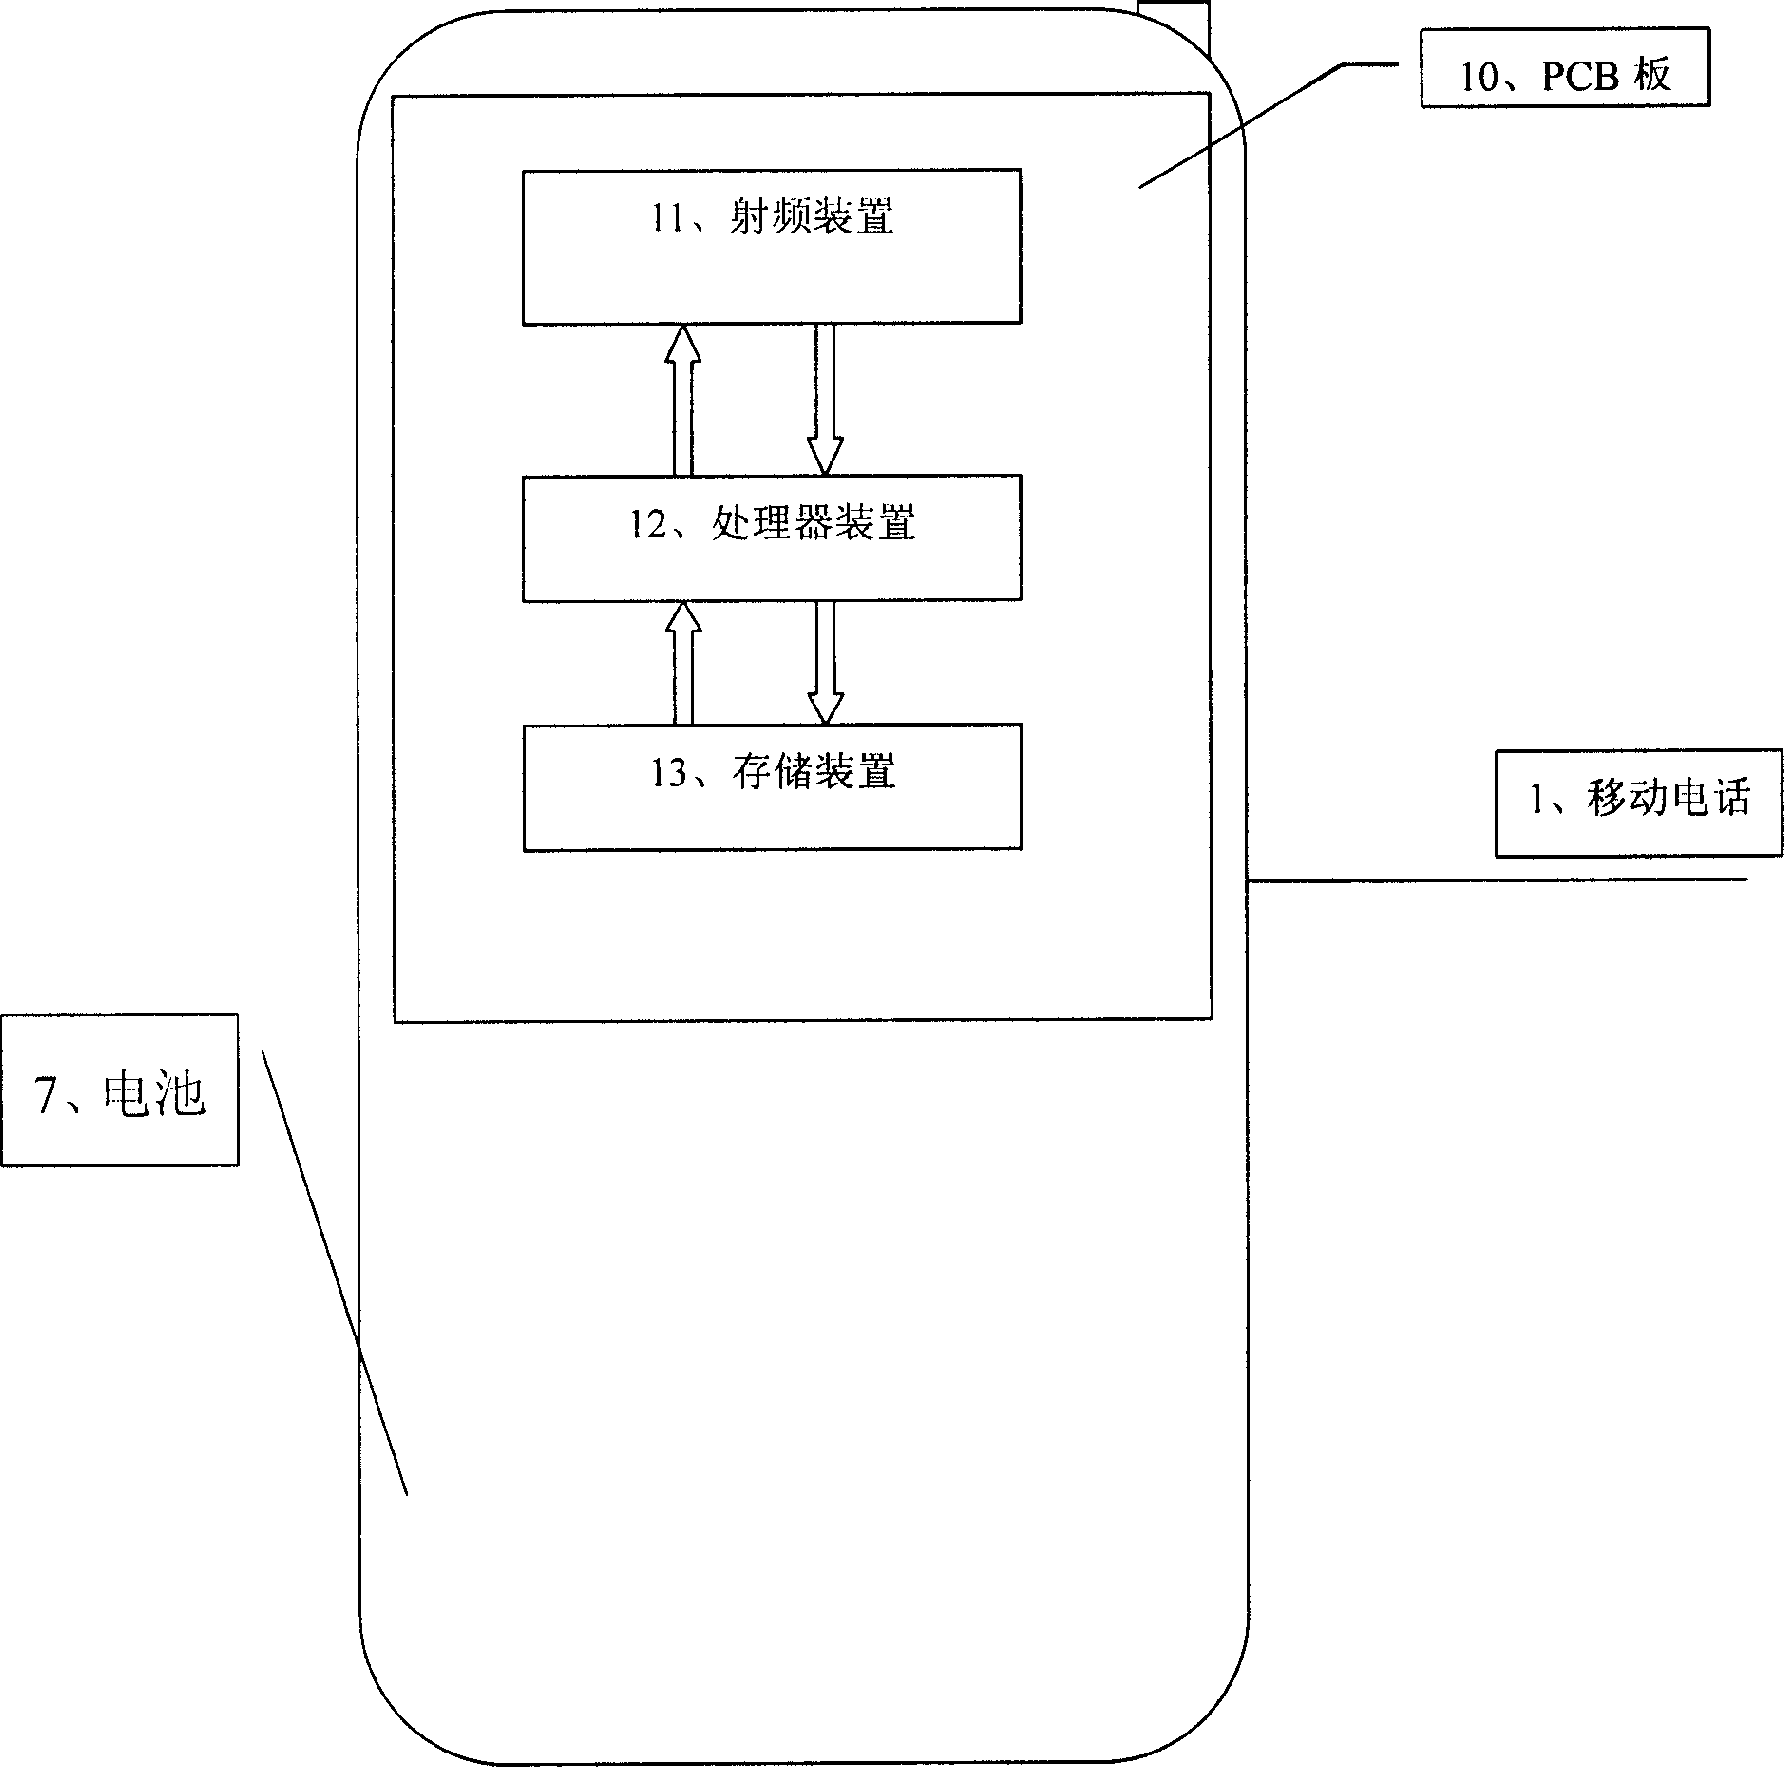 Method for making mobile telephone select tel. numbers to be transferred